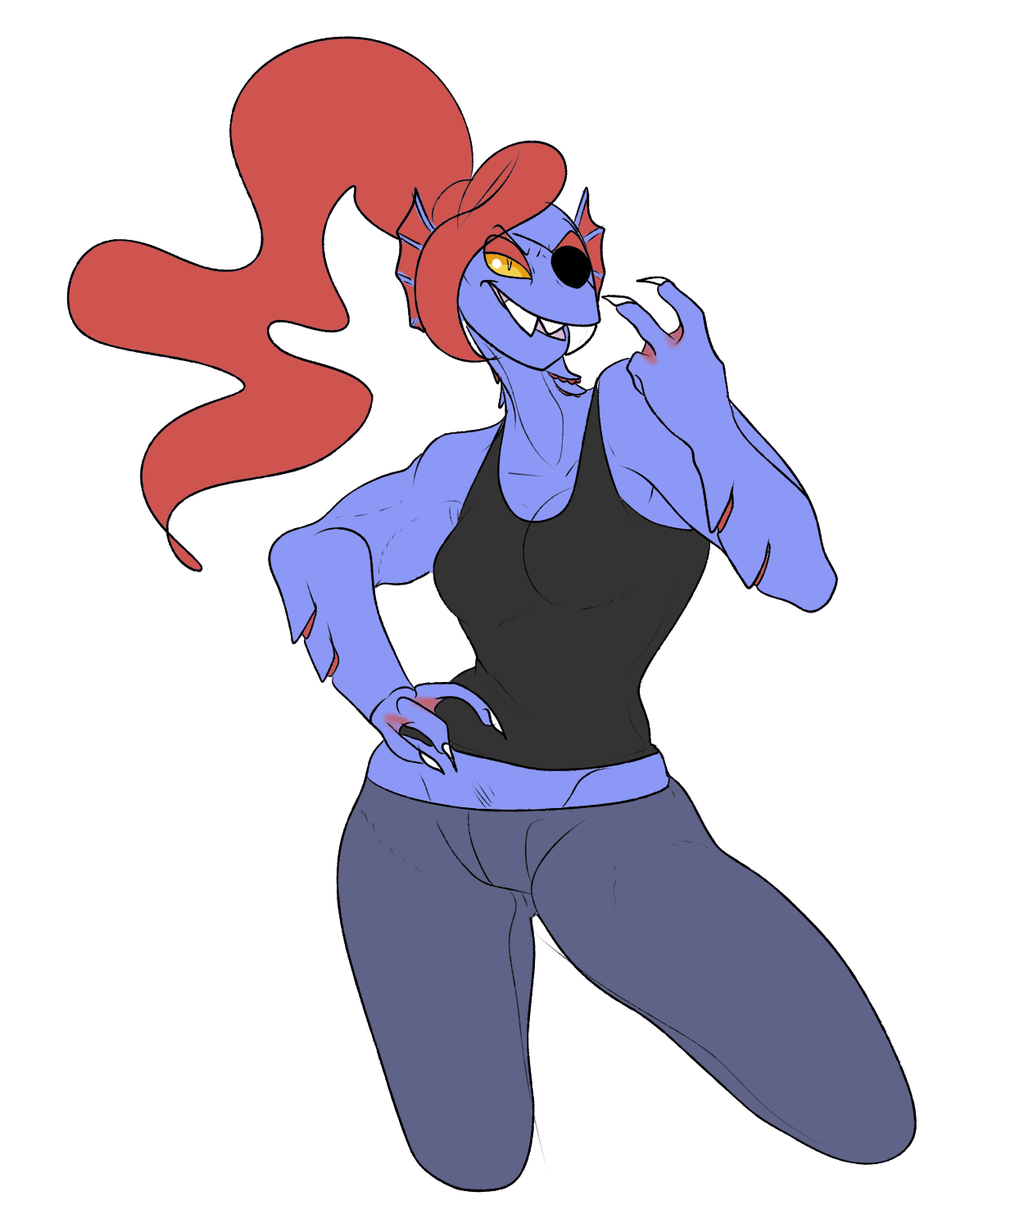 Most recent image: Undyne